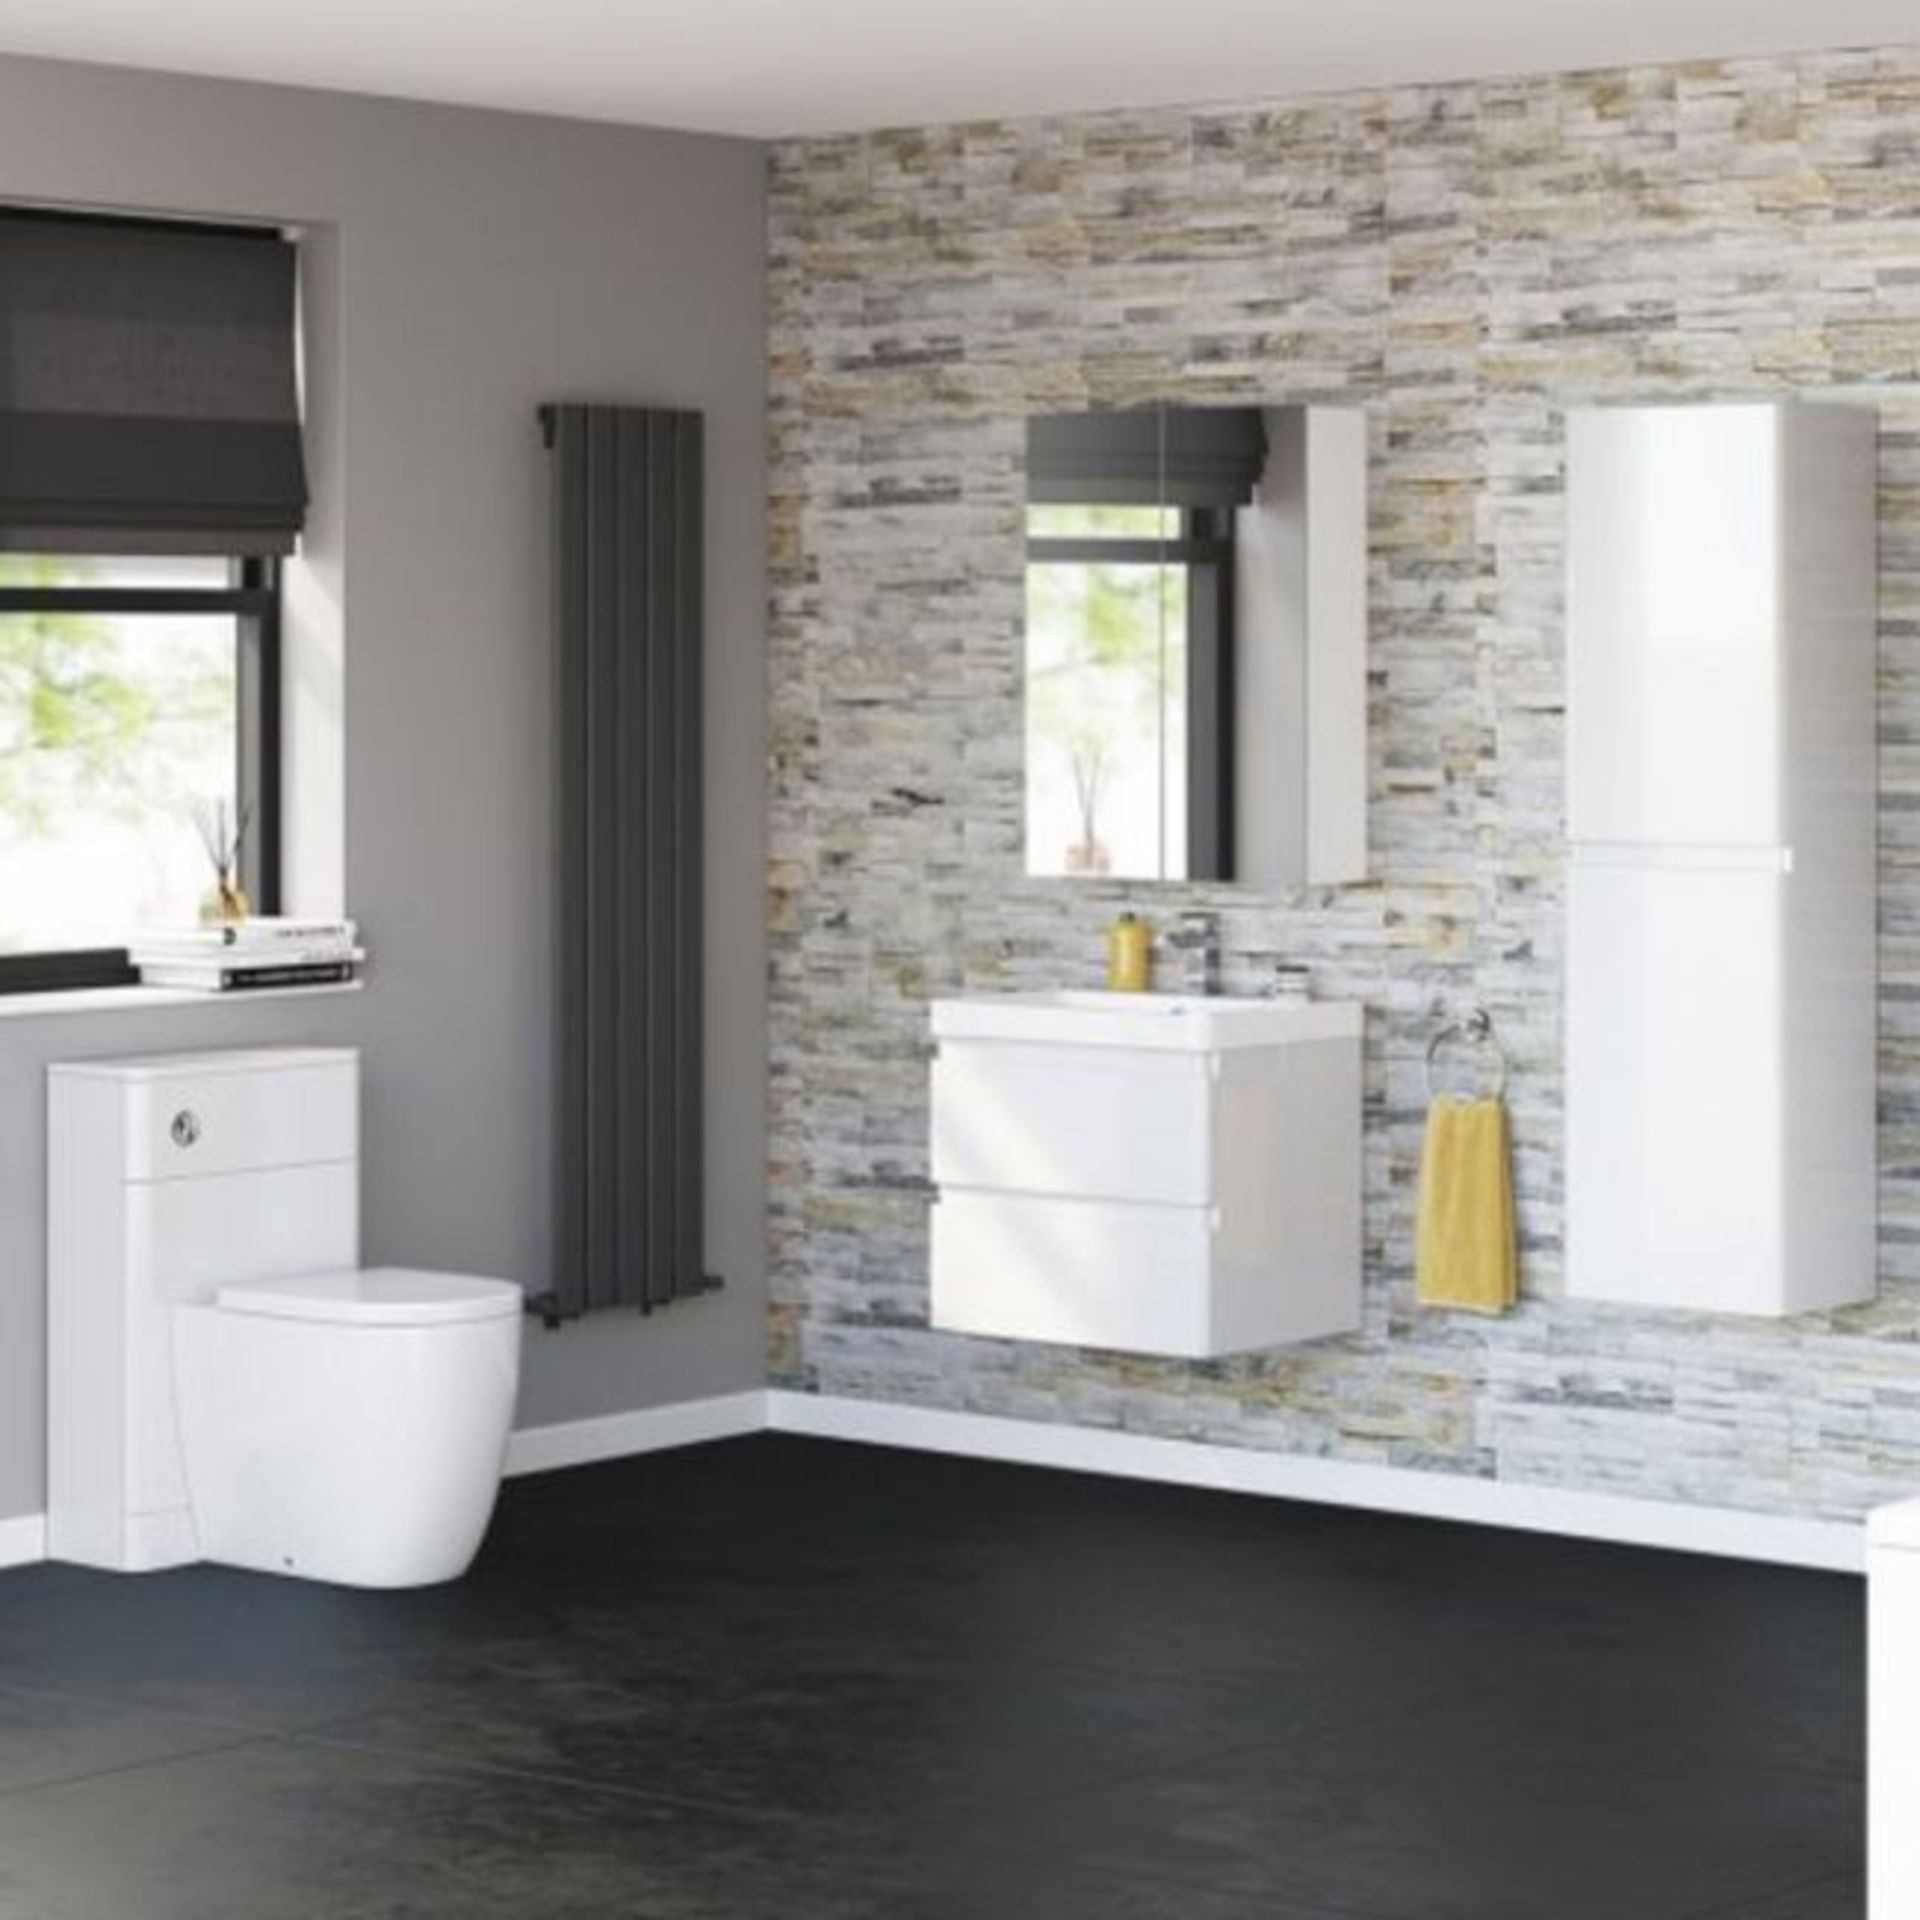 New & Boxed 600mm Denver II Gloss White Built In Basin Drawer Unit - Wall Hung. RRP £849.99.Mf2401. - Image 2 of 2